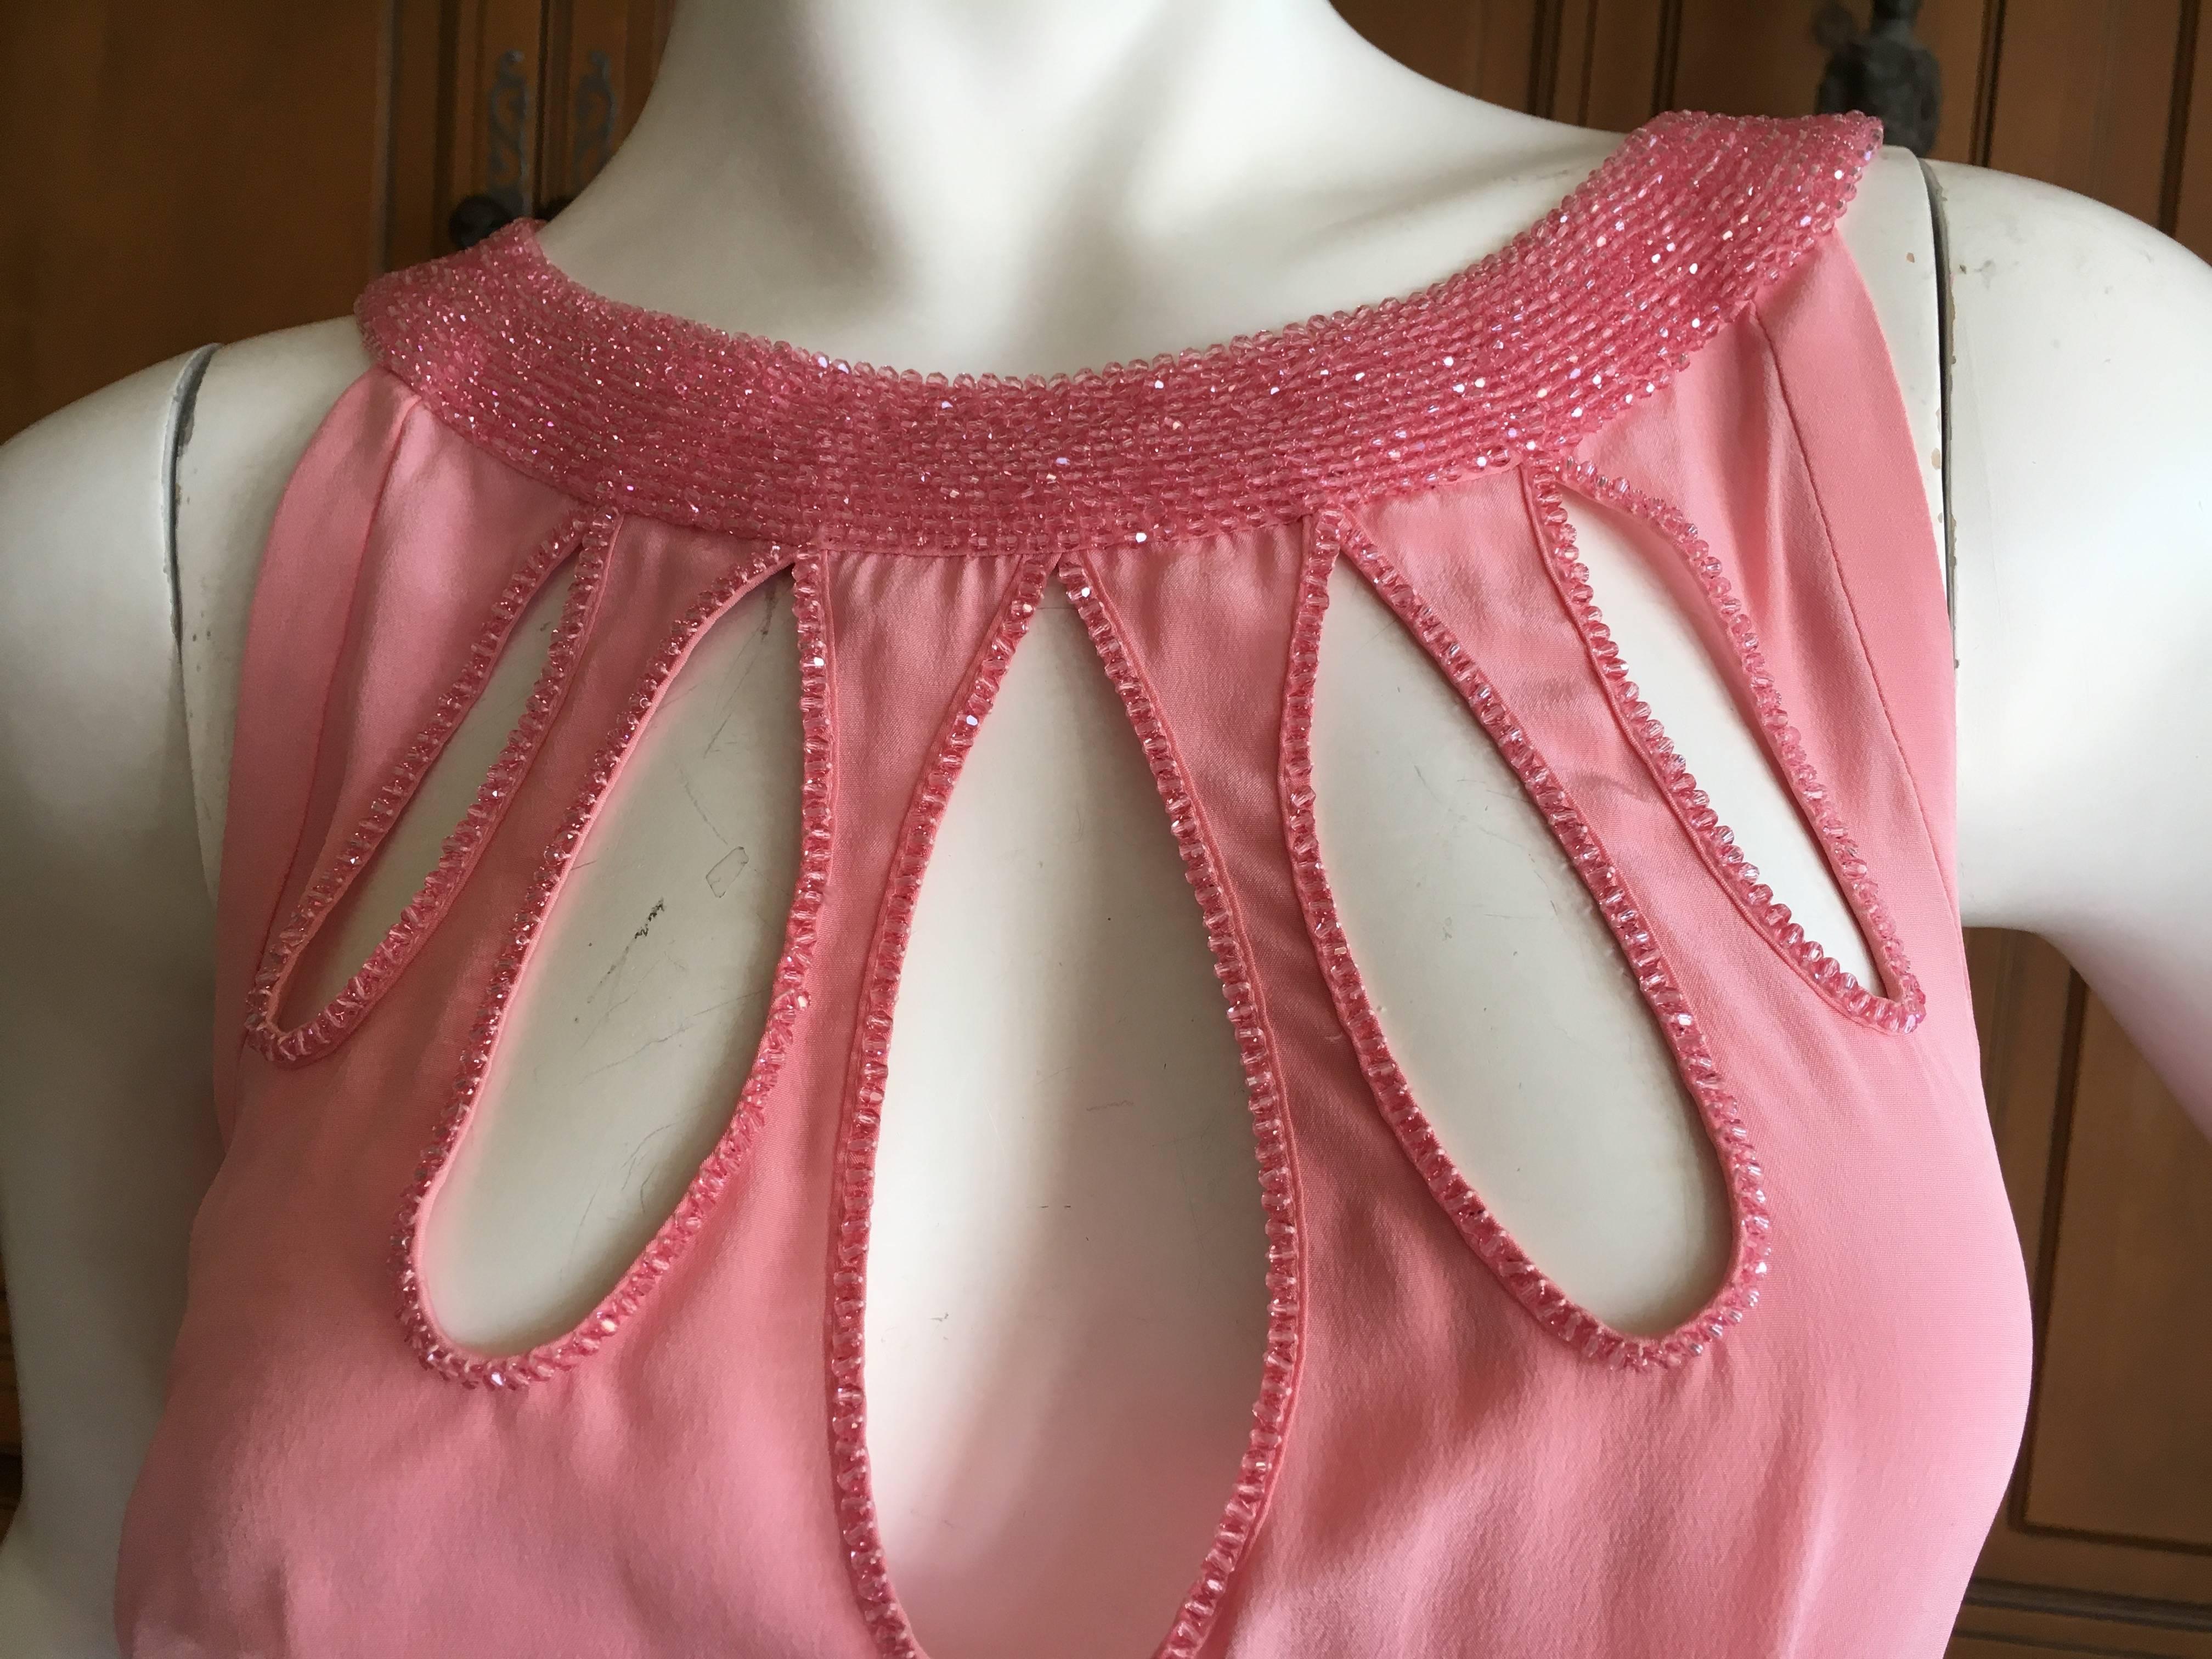 Moschino Pink Beaded Evening Dress with Keyhole Accents In Excellent Condition For Sale In Cloverdale, CA